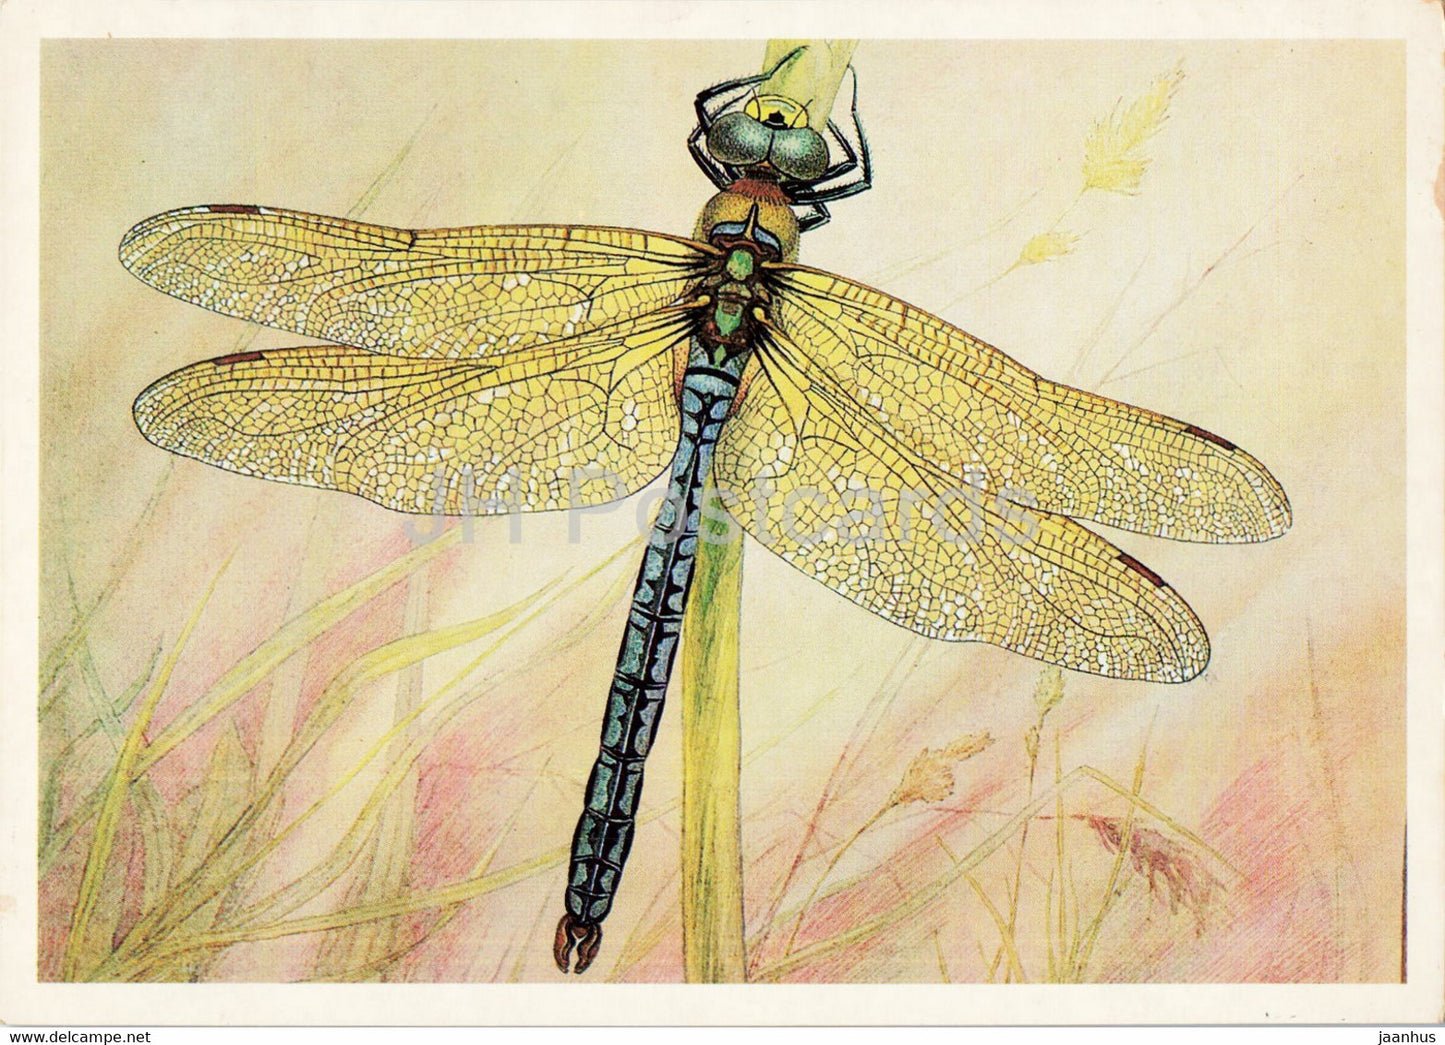 Anax imperator - The Emperor dragonfly - dragonfly - Insects - illustration - 1987 - Russia USSR - unused - JH Postcards